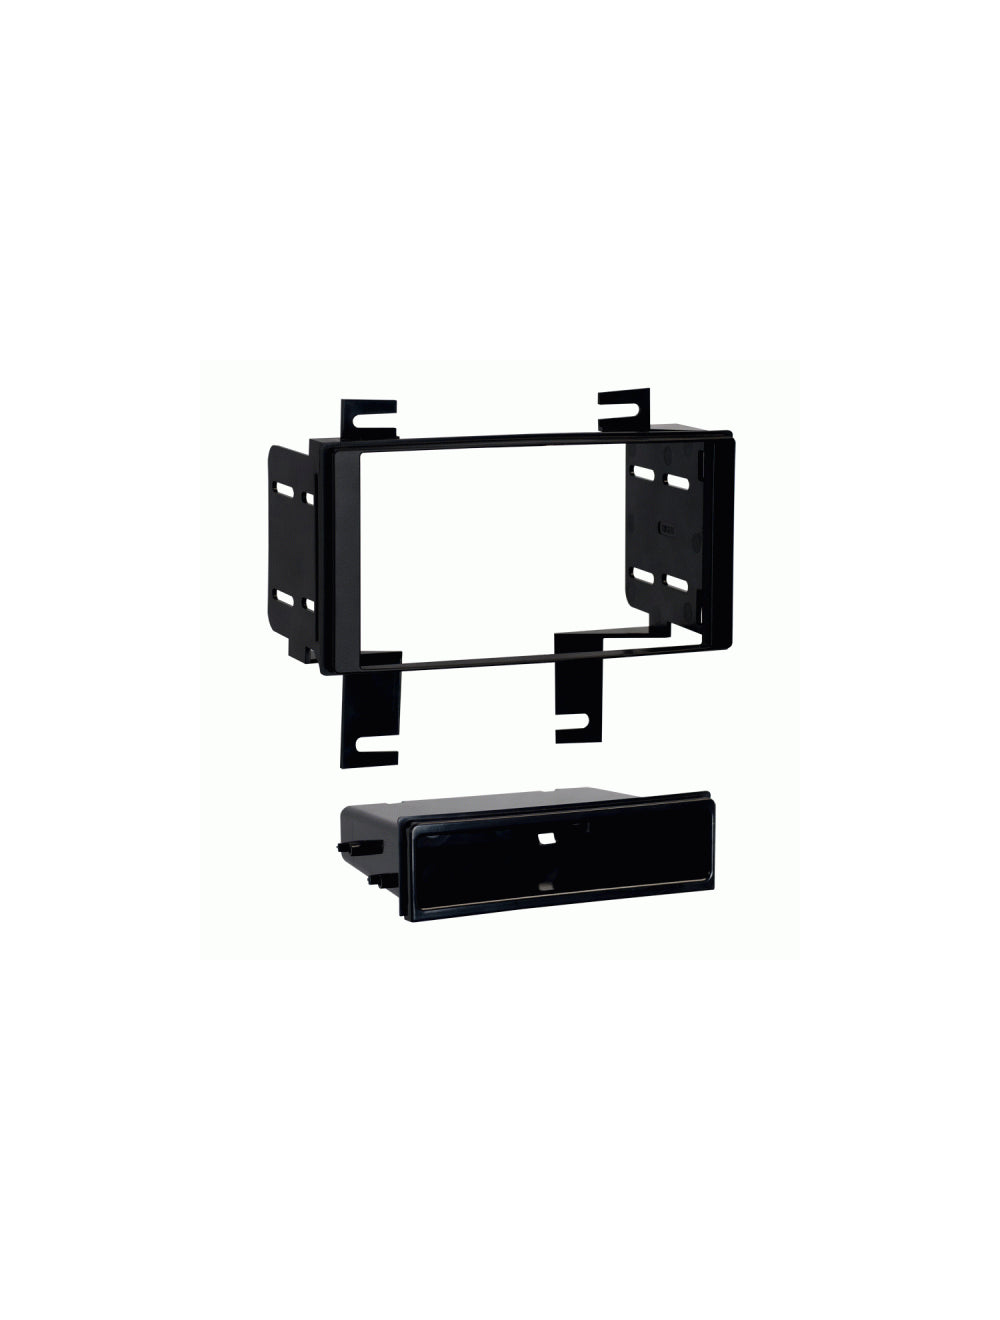 Metra 99-7616 Single/Double DIN Installation Kit for Select 2012-Up Nissan Rogue Vehicles